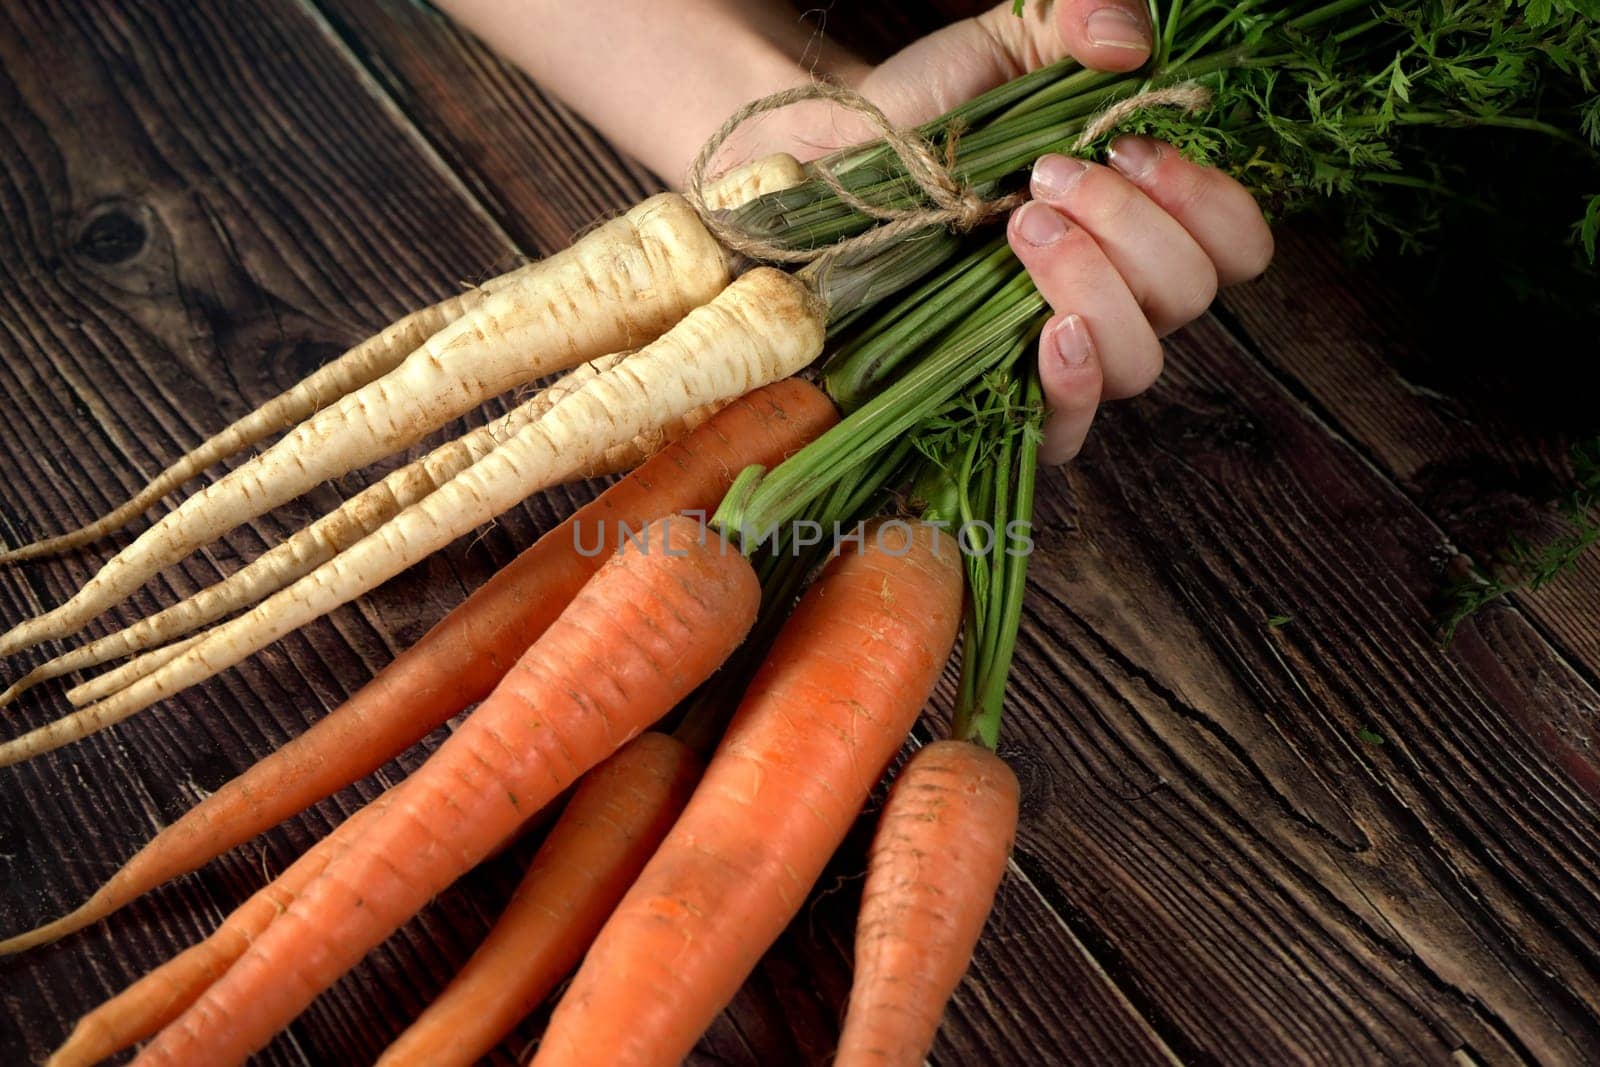 Hand holding bunch of carrots and parsnip roots over brown rustic wooden board